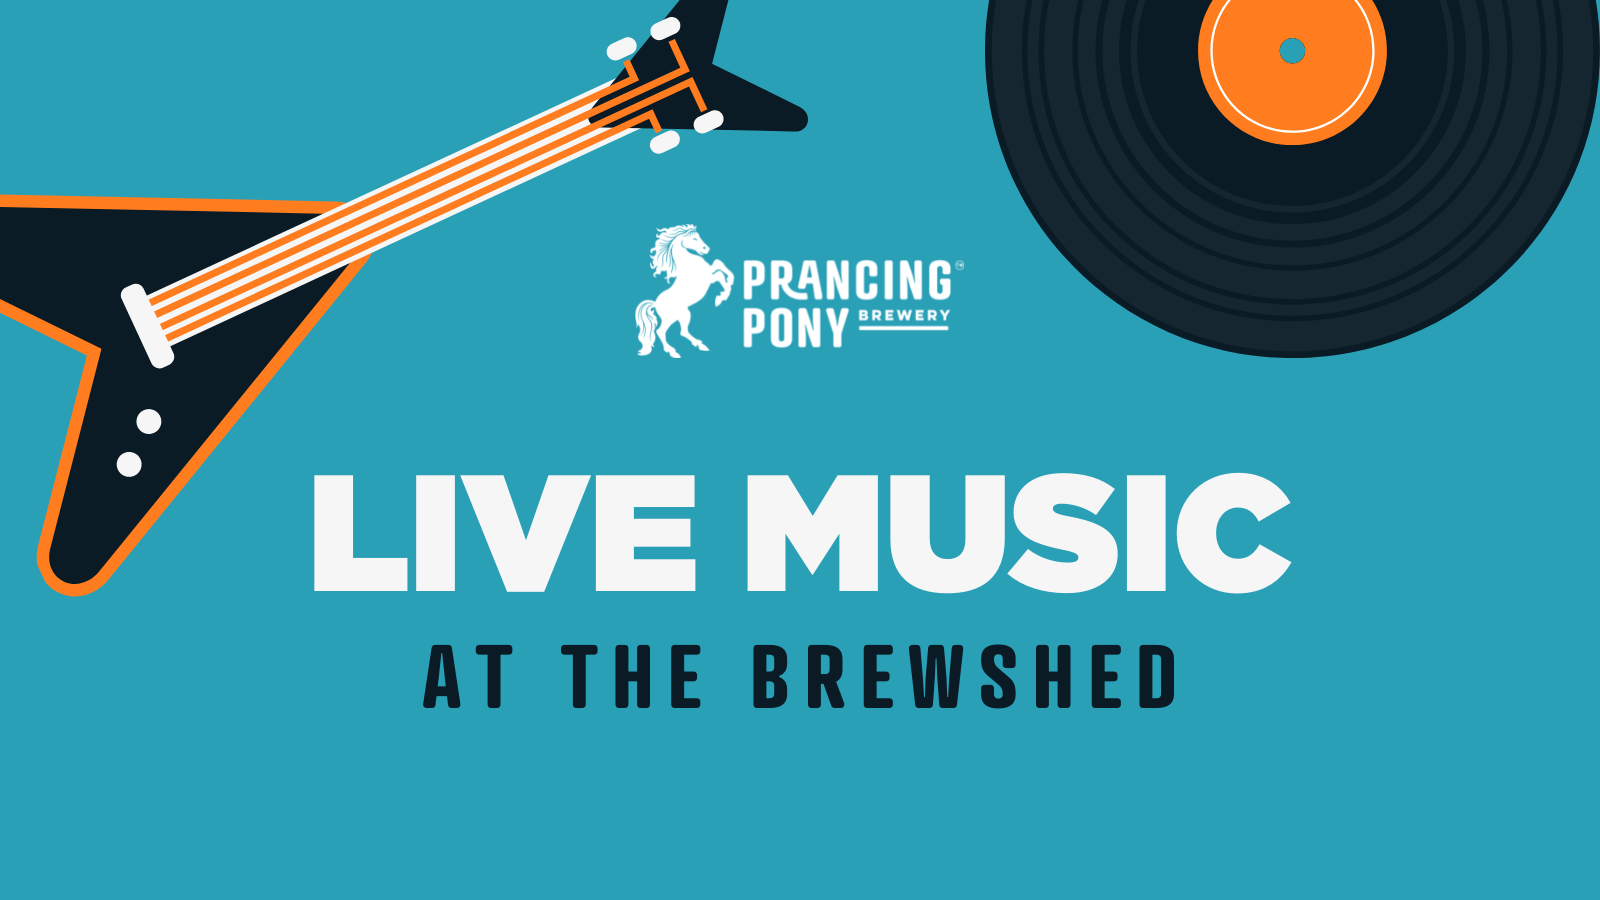 Live music at the Brewshed